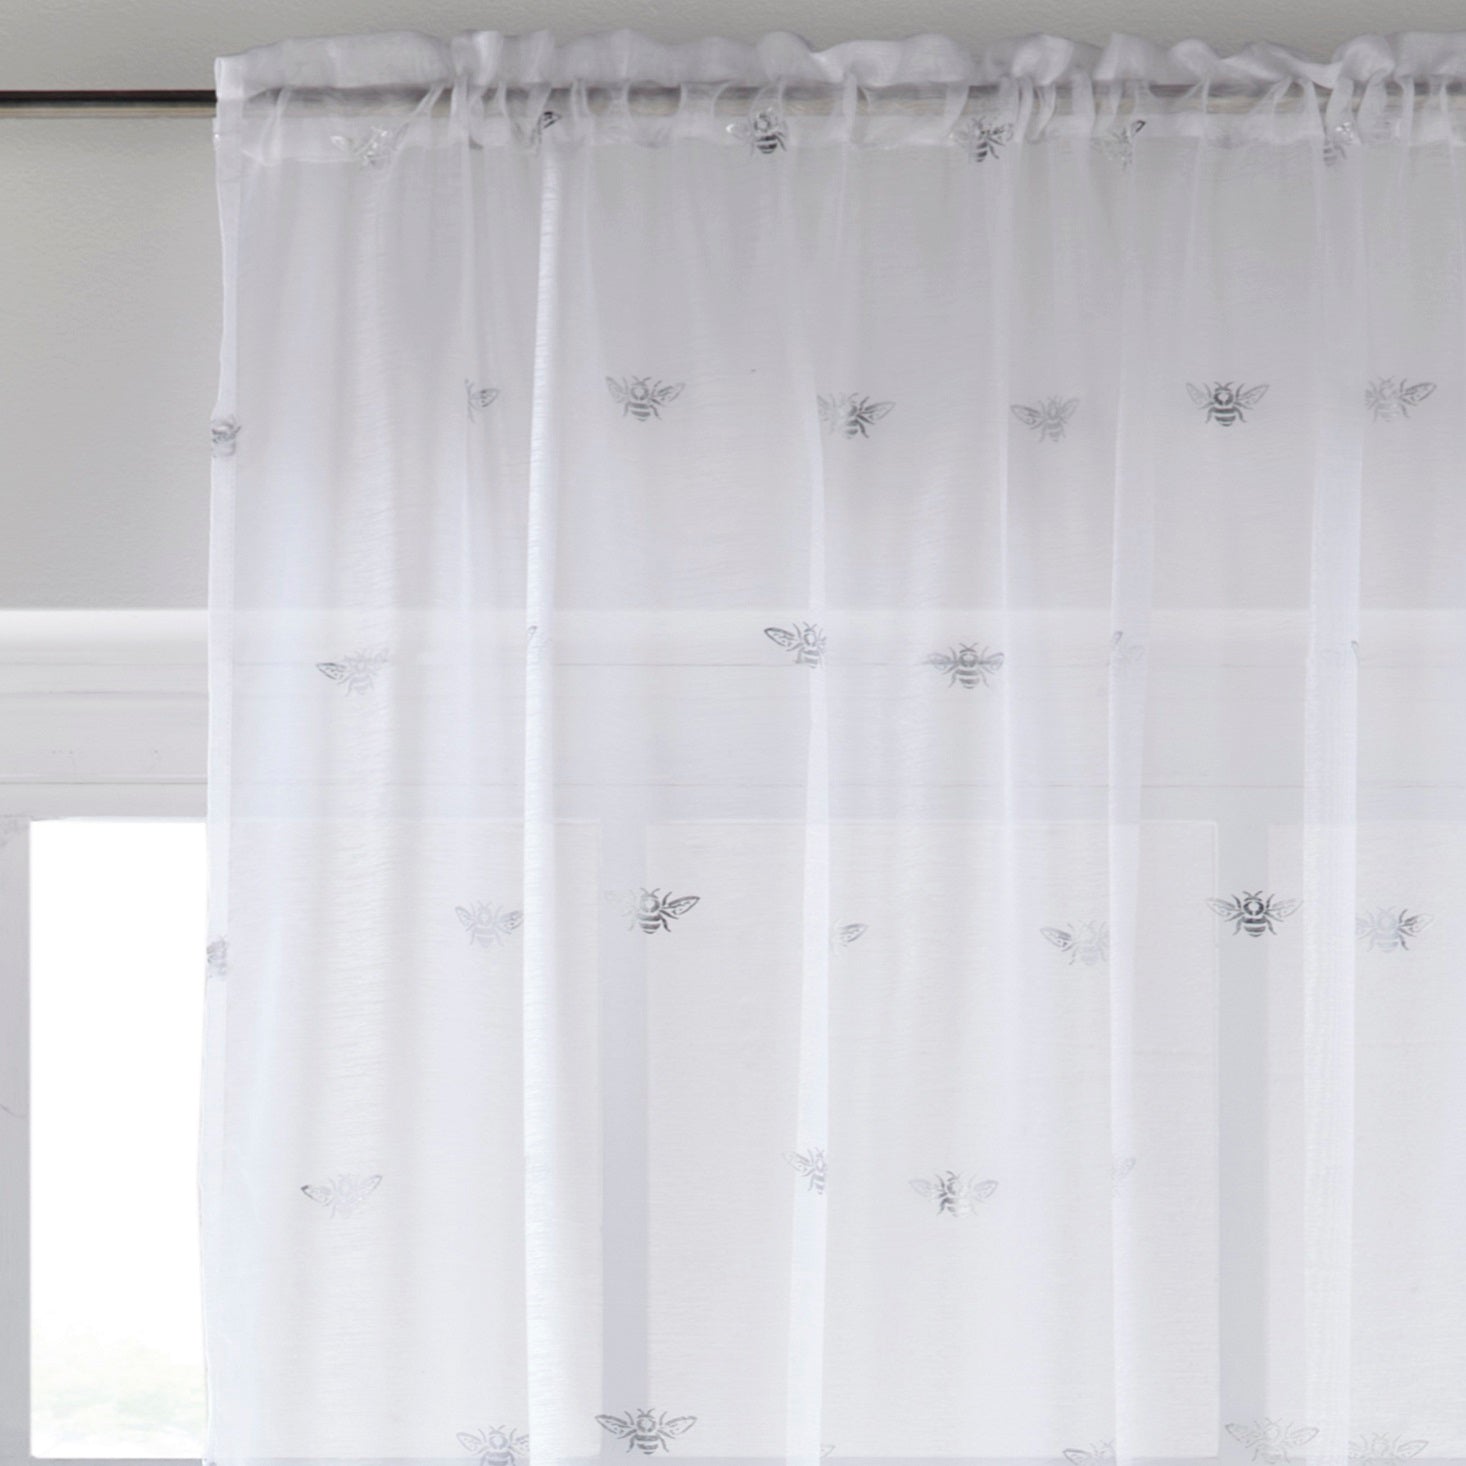 55x54" Sparkle Bees Voile Net Curtains Panel - White & Silver Grey